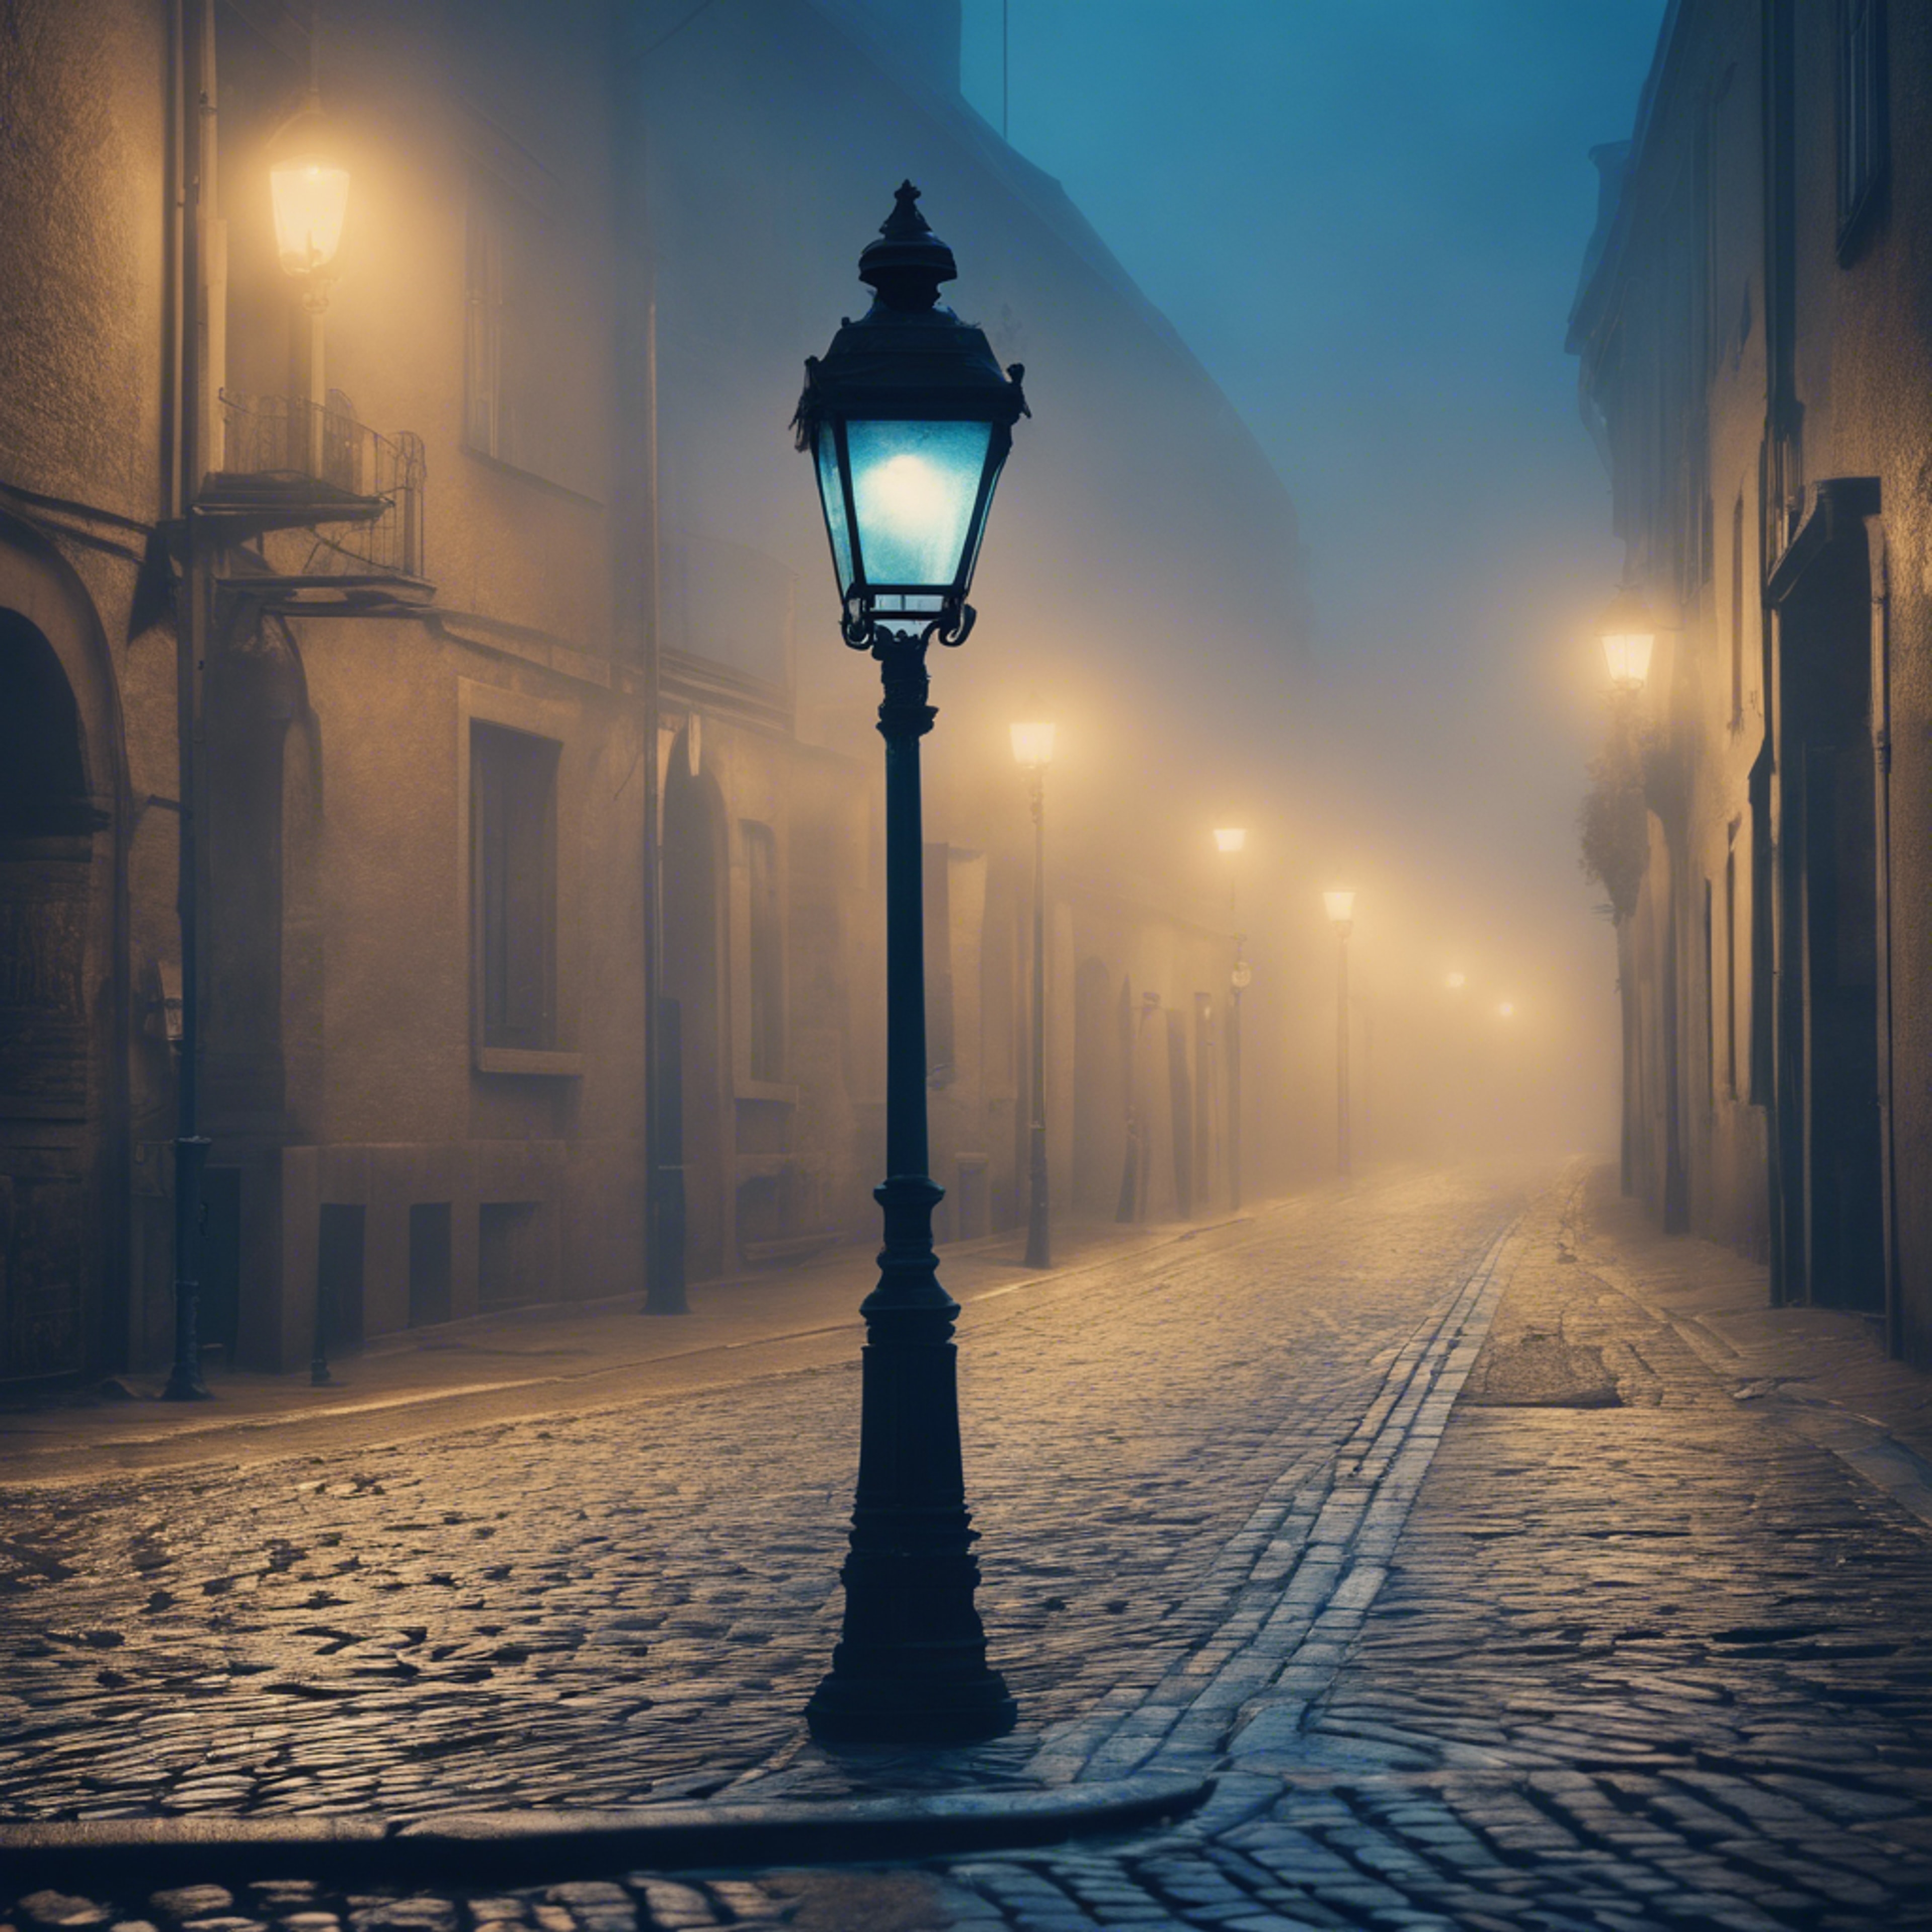 A foggy image of a cobblestone street lit by an old blue lamp post. Тапет[86a8420f9b4d45a484bd]